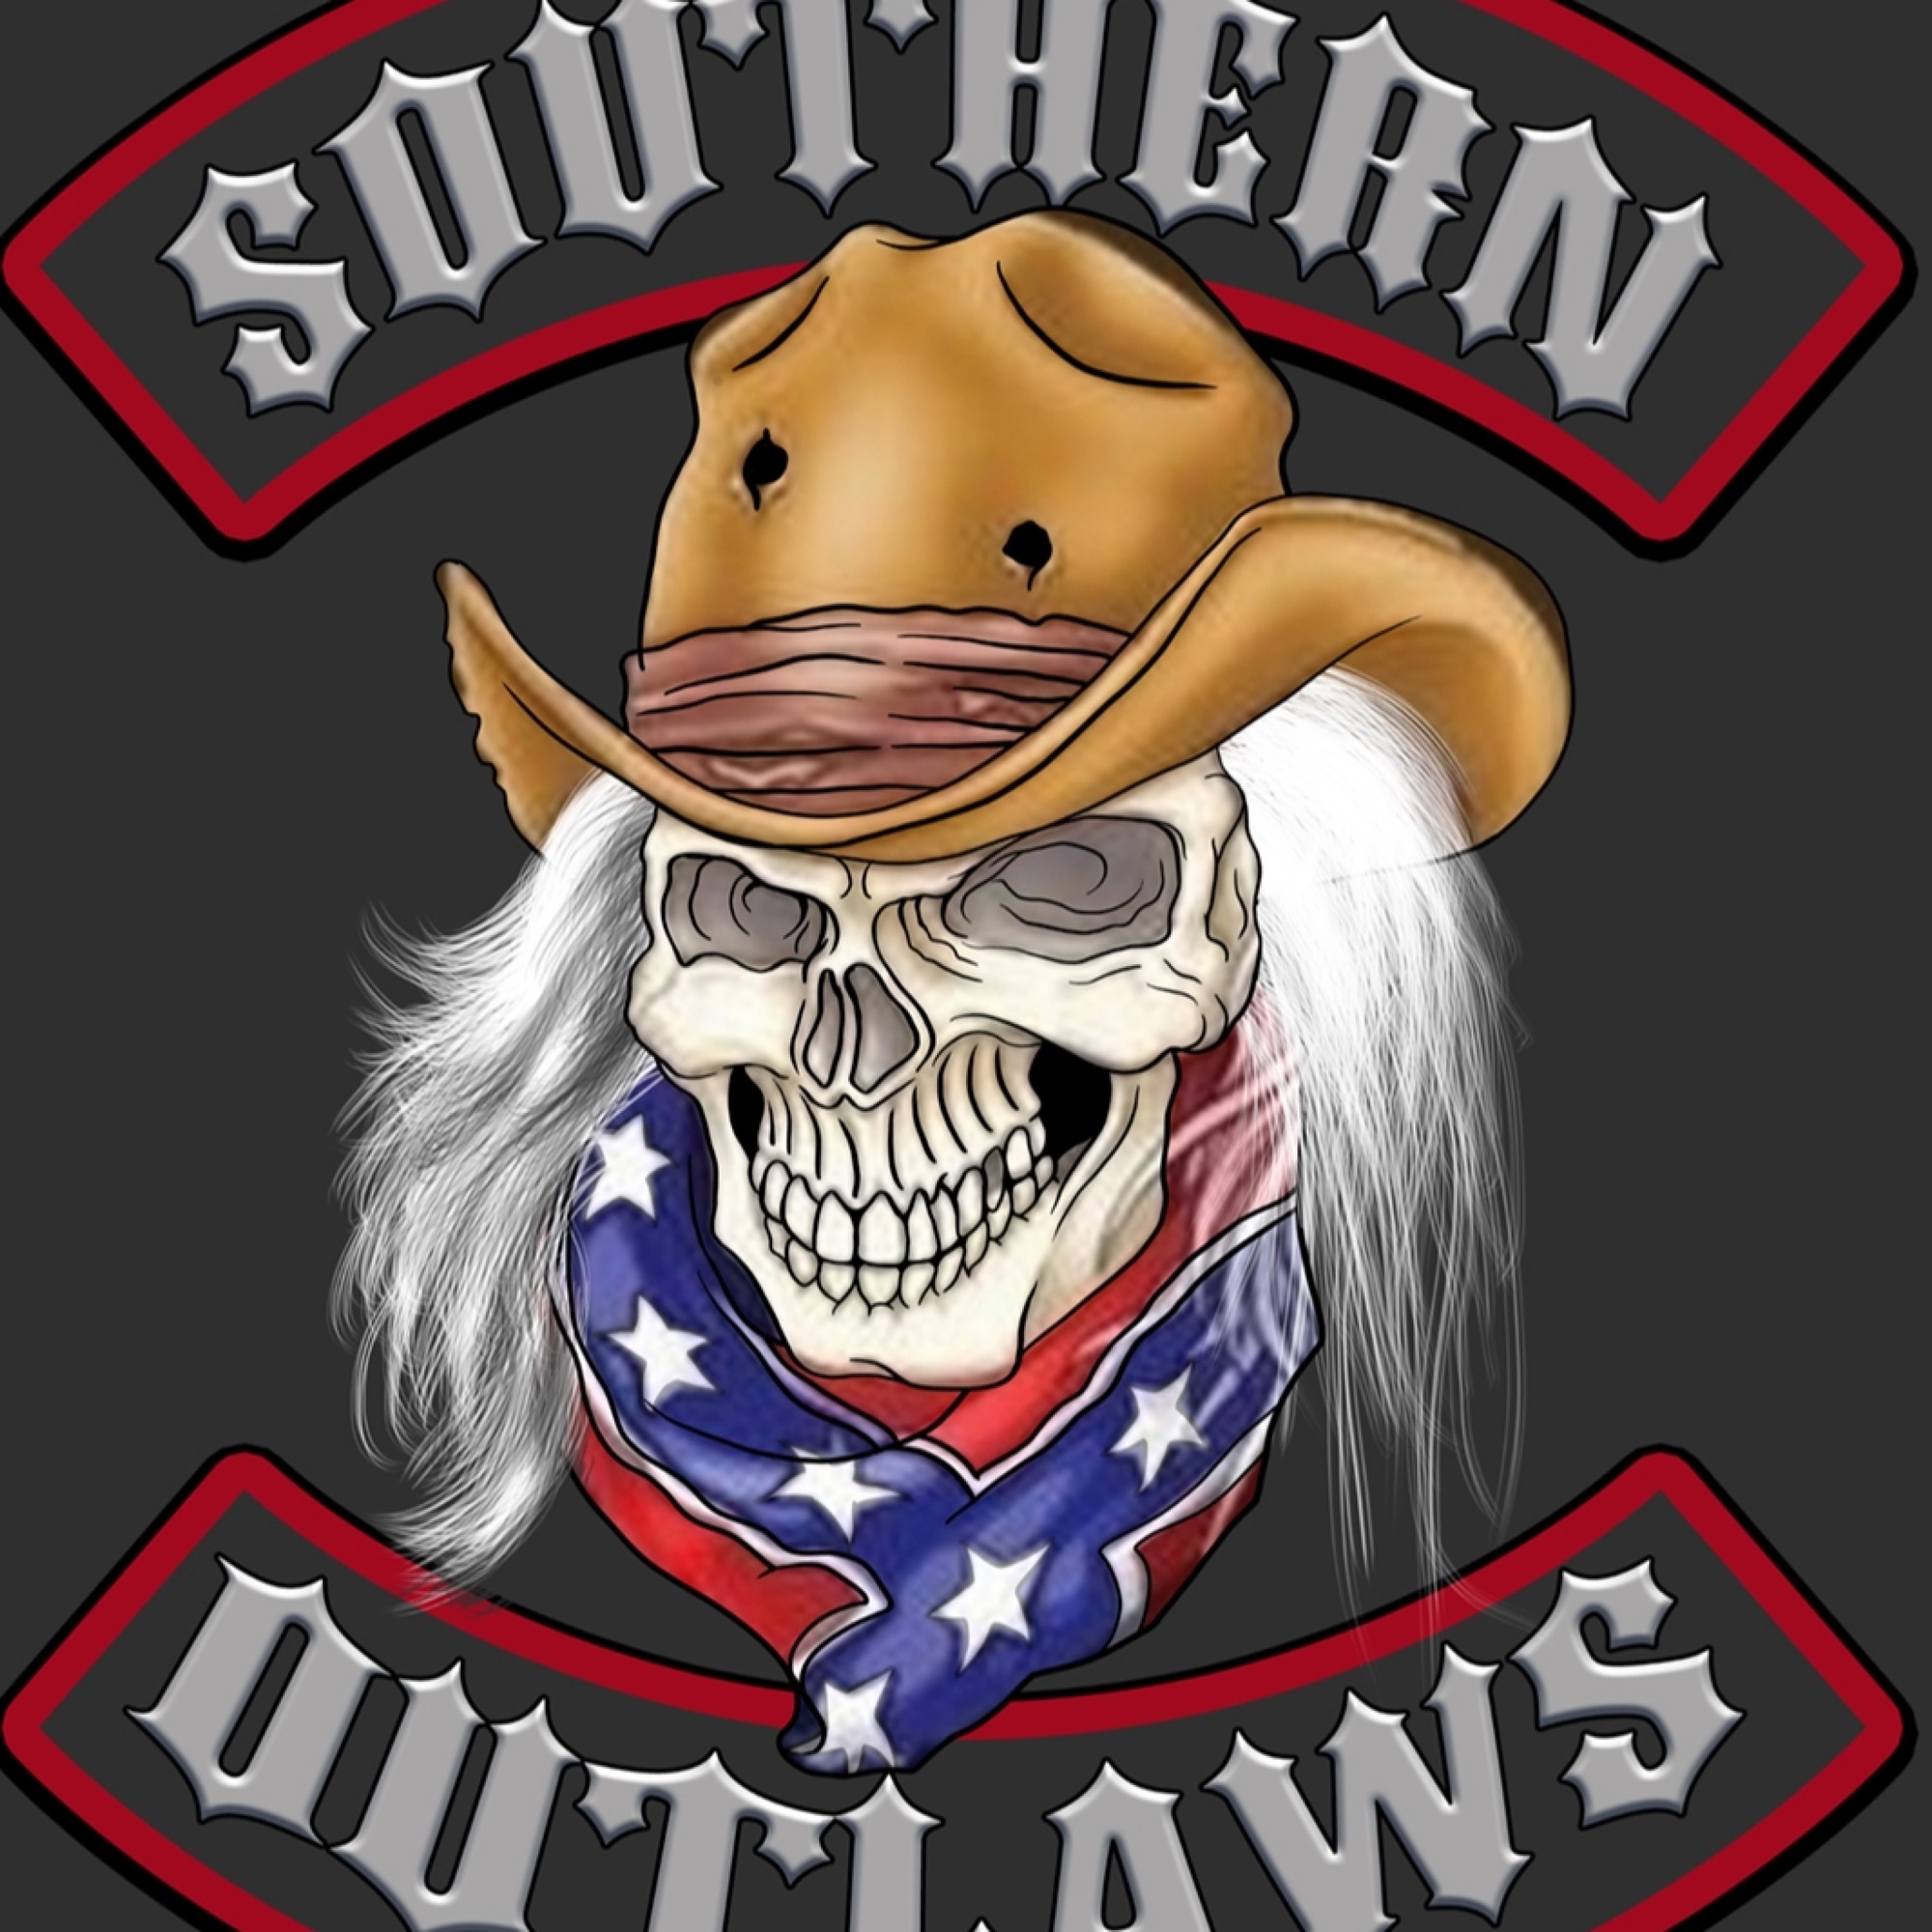 Art for Ring of Fire by The Southern Outlaws Band